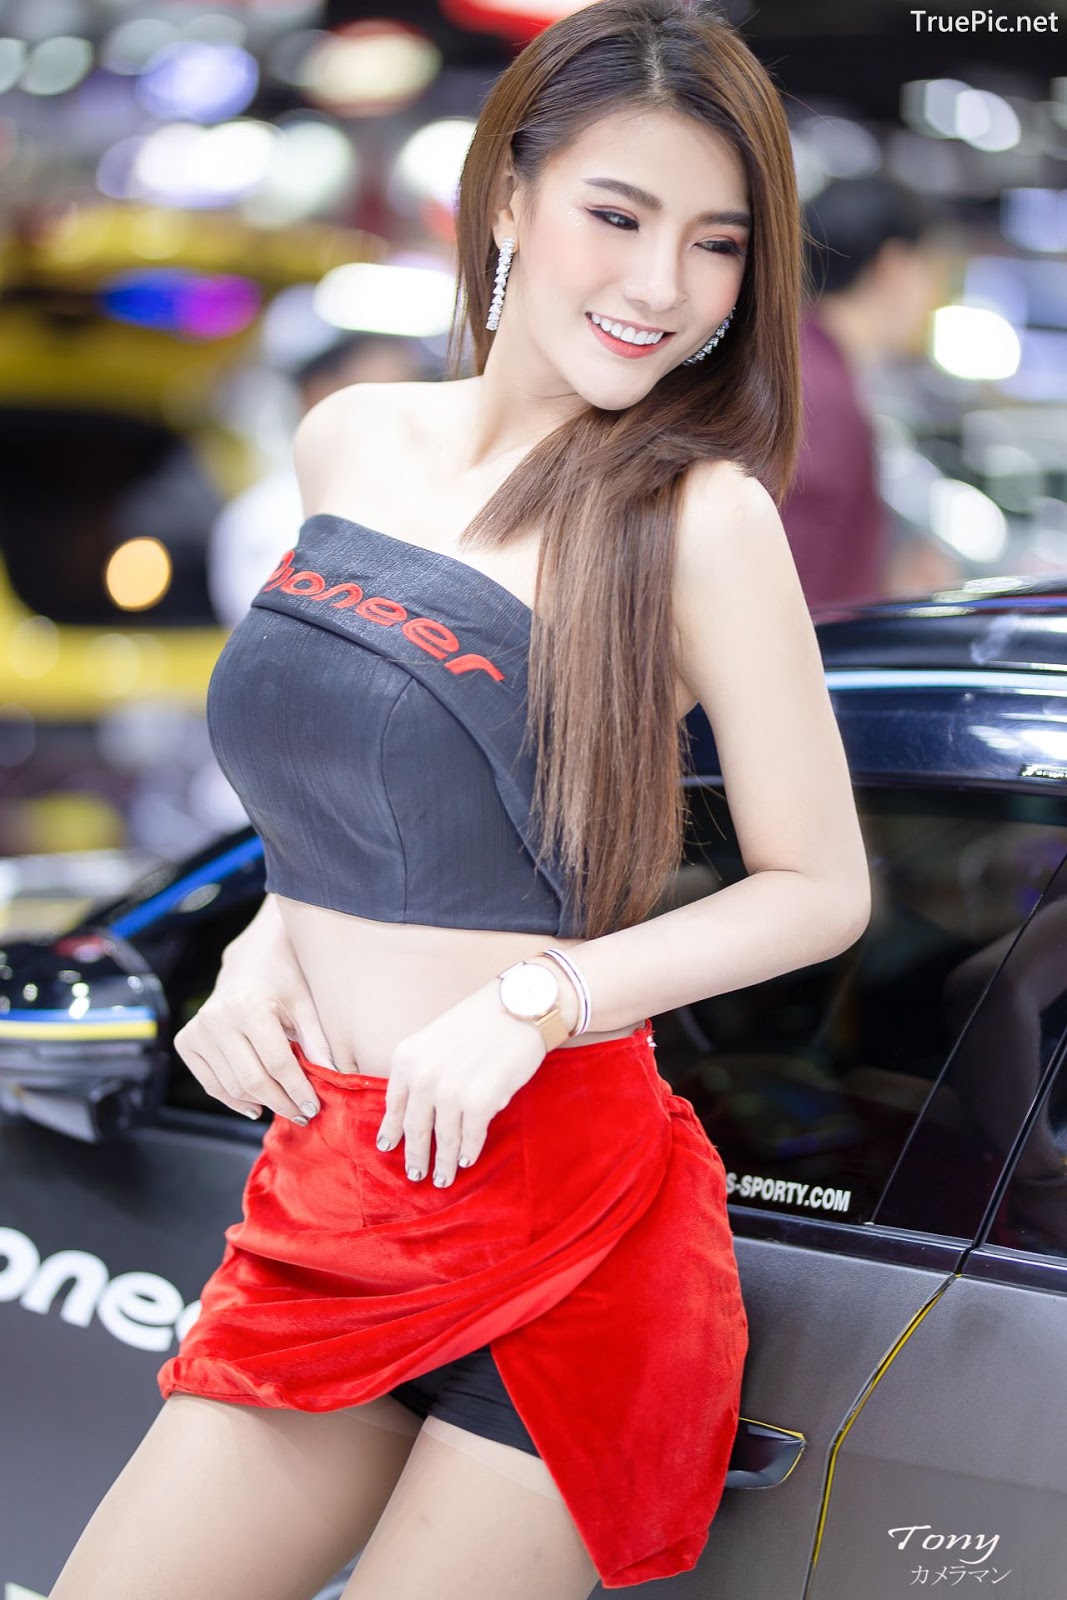 Image-Thailand-Hot-Model-Thai-Racing-Girl-At-Motor-Expo-2019-TruePic.net- Picture-122